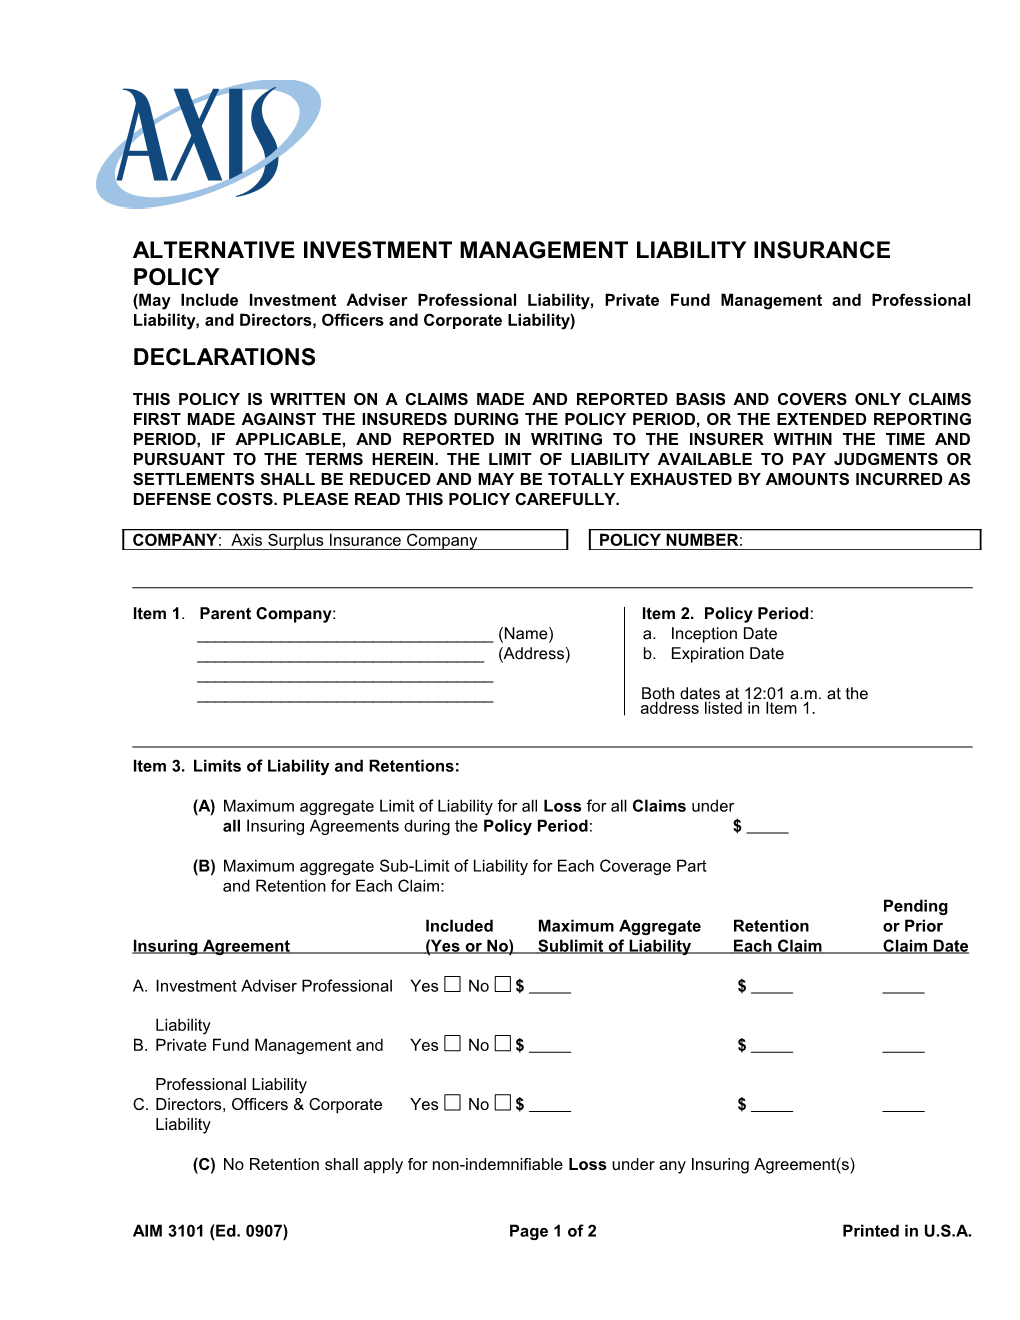 ALTERNATIVE INVESTMENT Management LIABILITY Insurance Policy